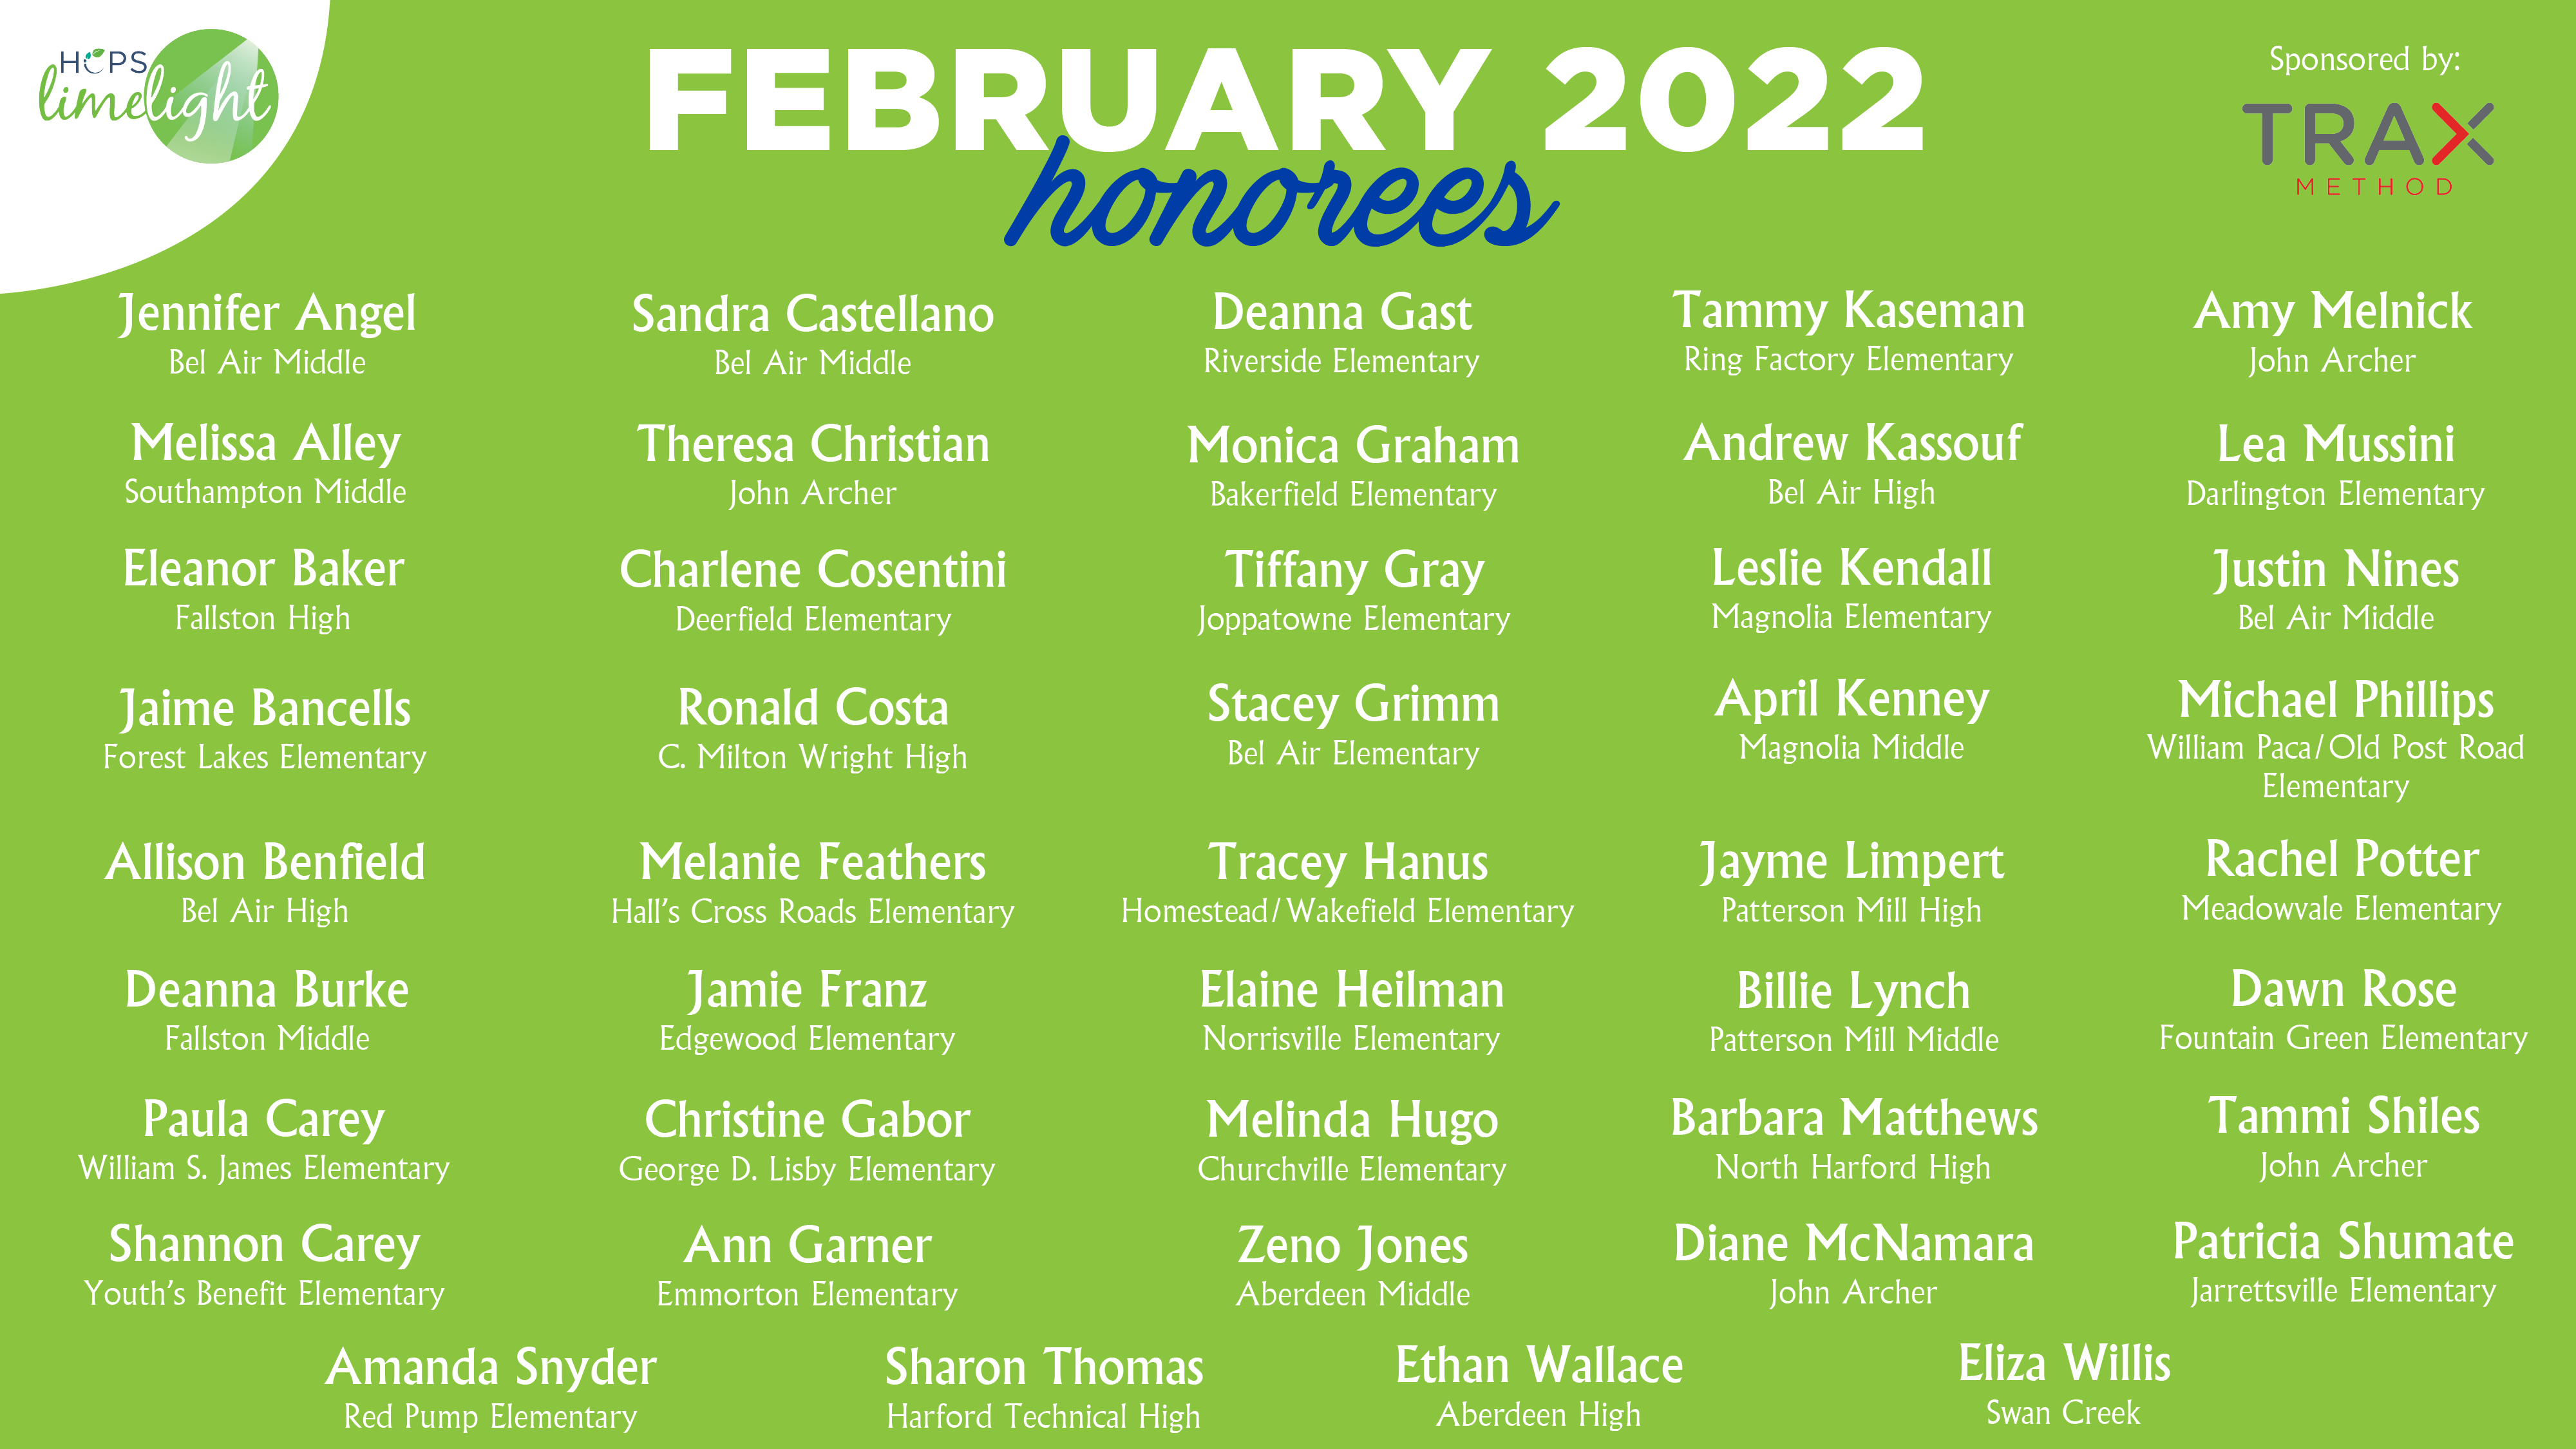 HCPS Limelight Honorees - Feb 2022